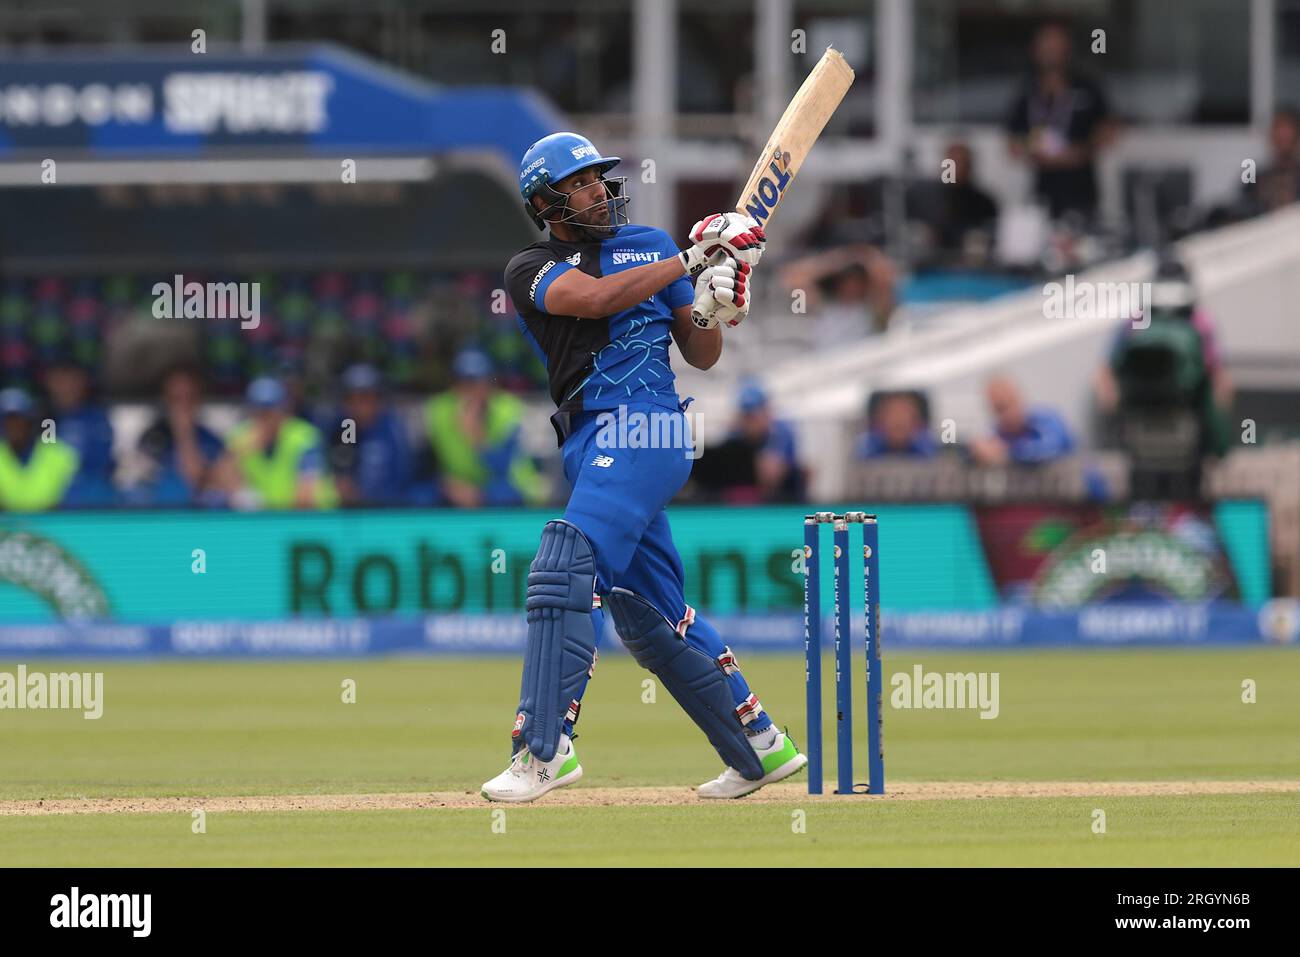 London, UK. 12th Aug, 2023. London Spirit's Ravi Bopara batting as the London Spirit take on the Trent Rockets in The Hundred men's competition at Lords. Credit: David Rowe/Alamy Live News Stock Photo